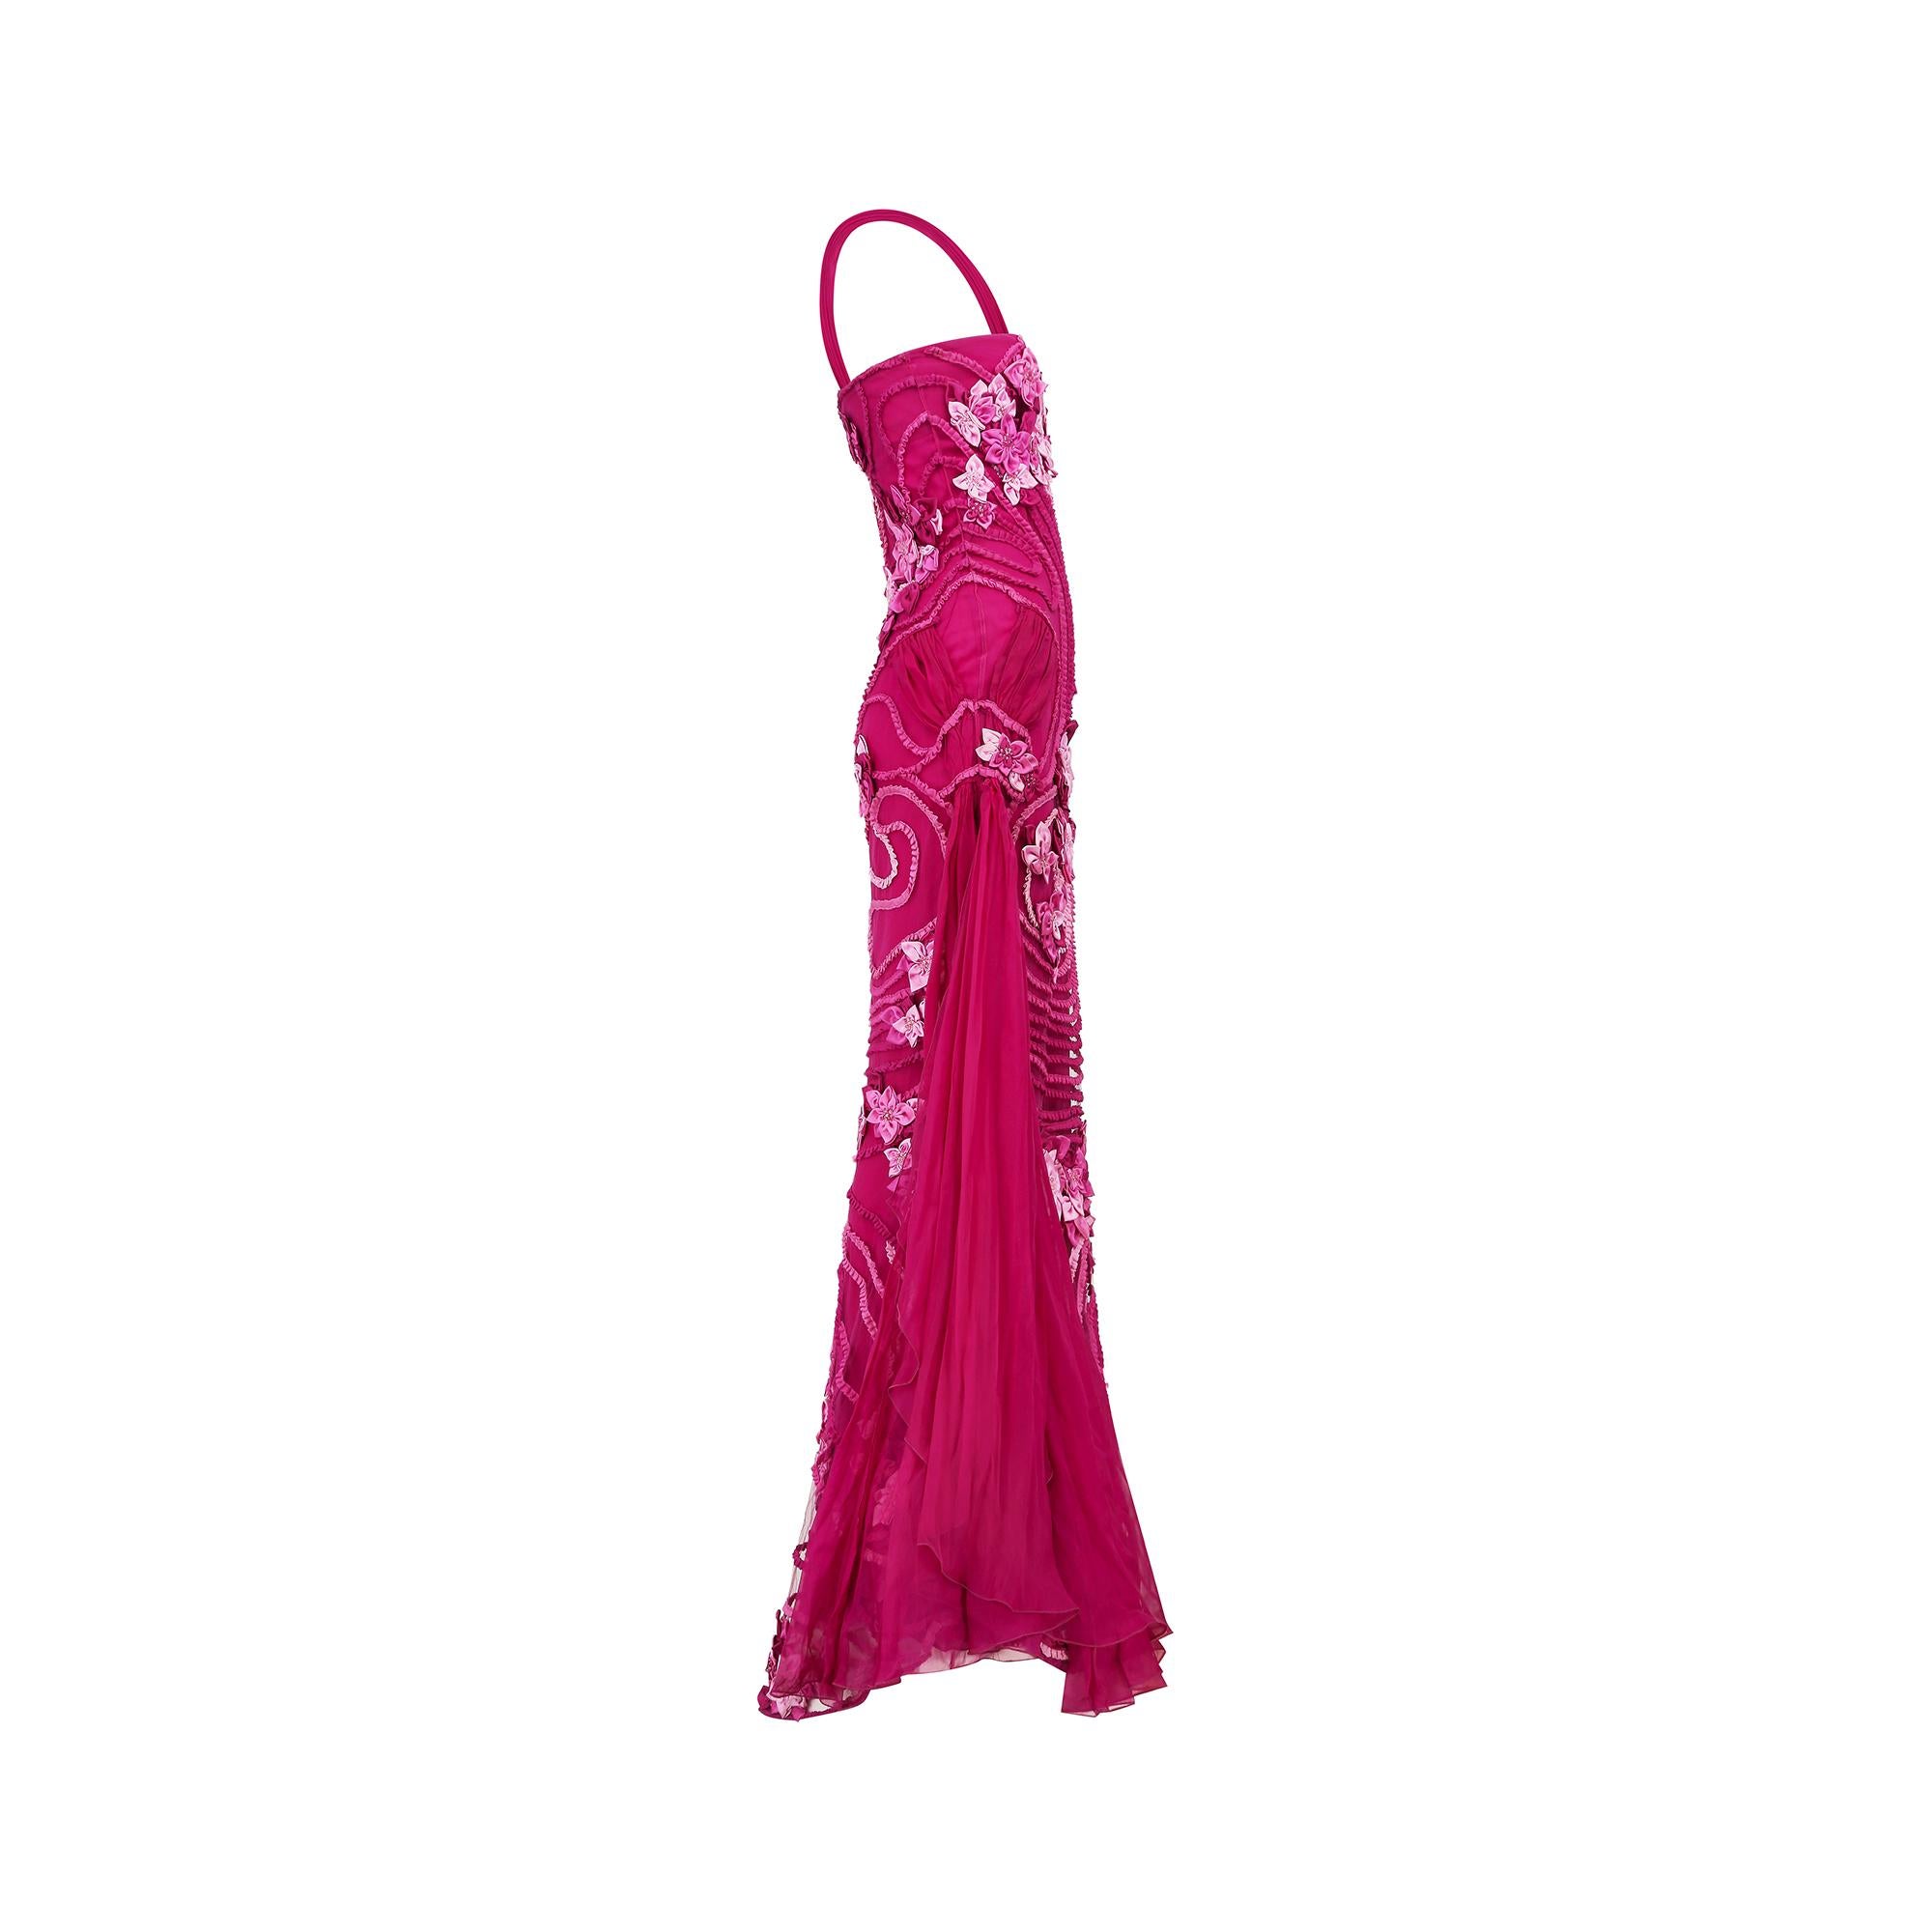 Women's 1990s Valentino Pink Couture Applique Evening Dress For Sale